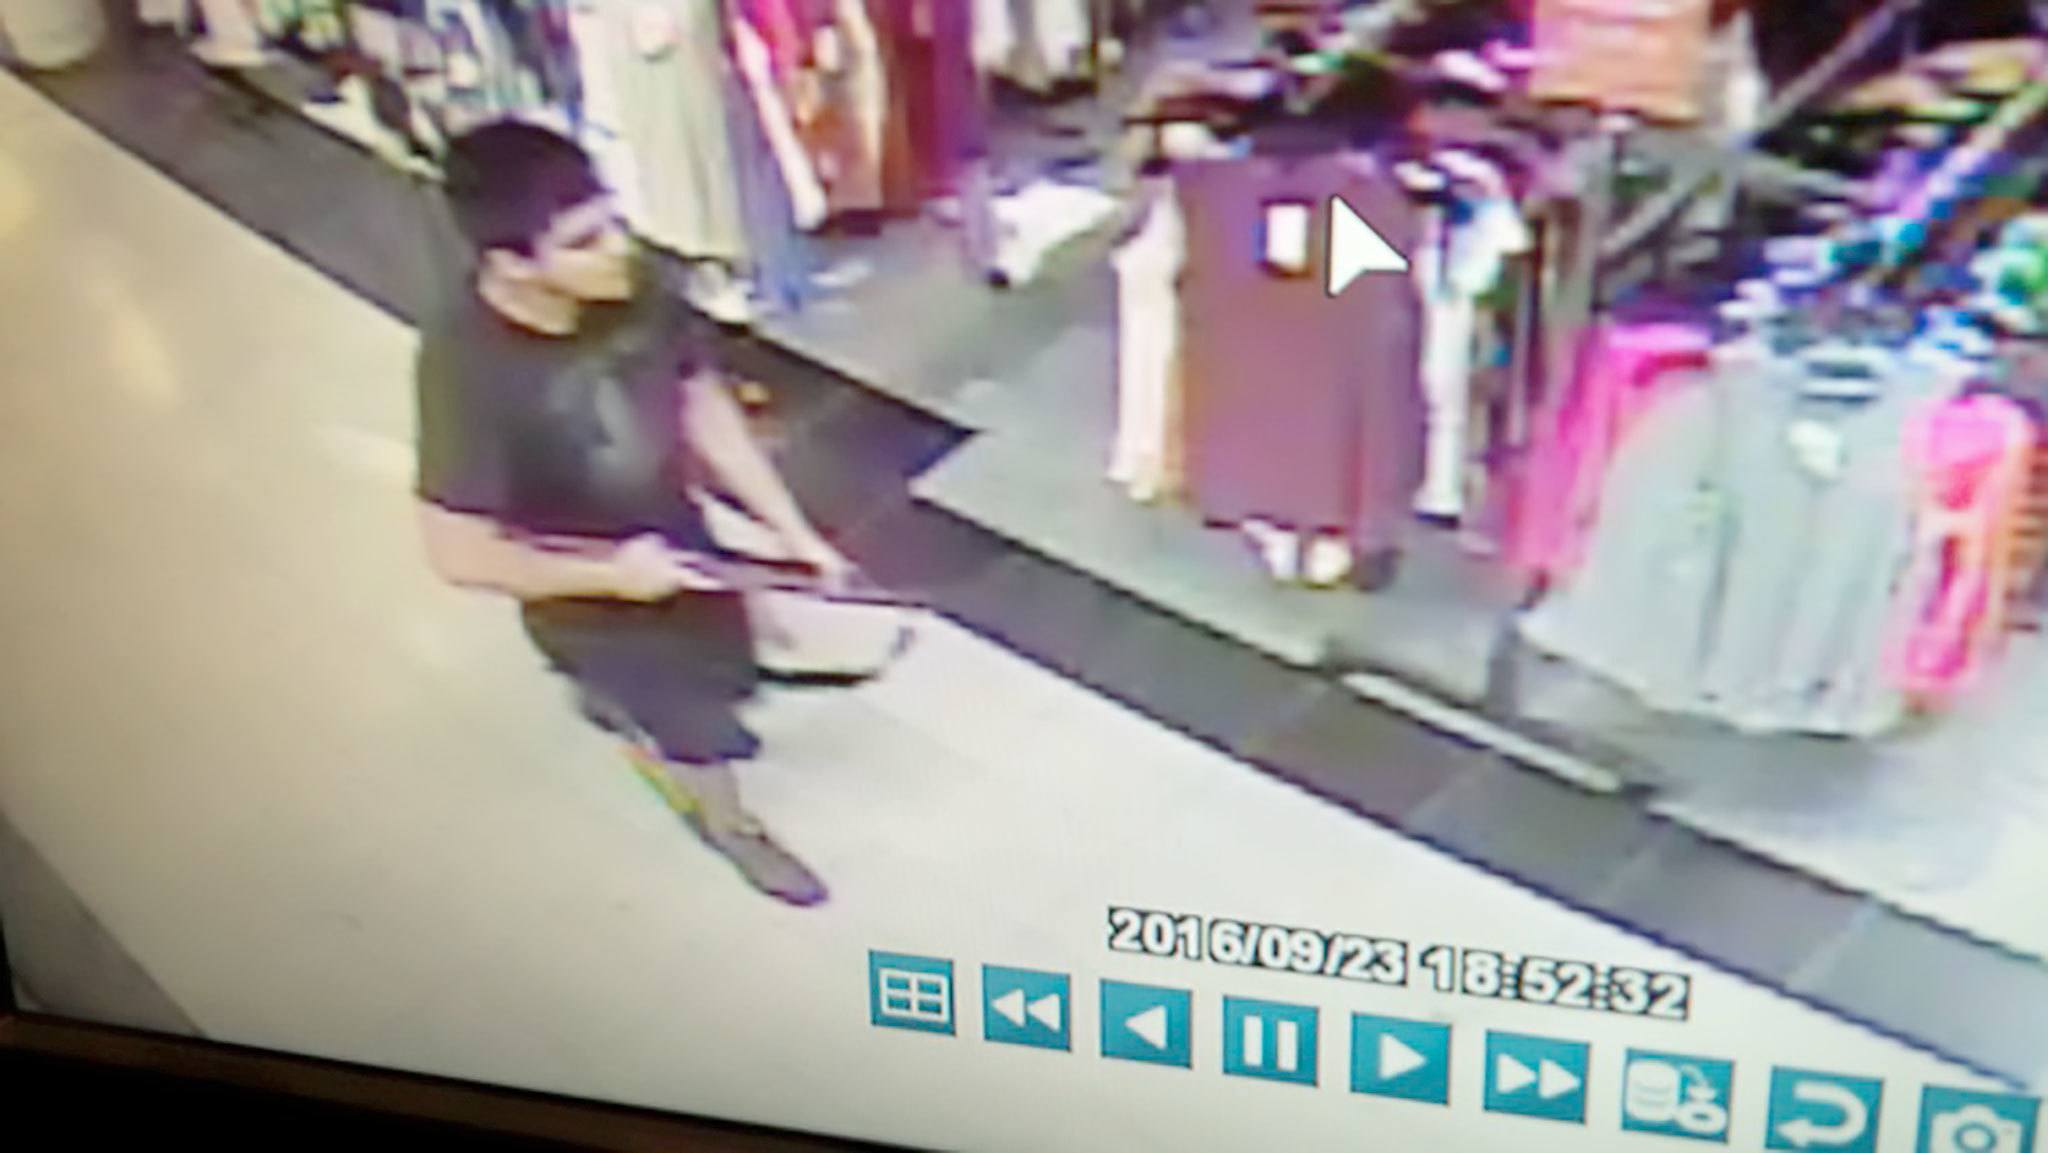 This image provided by police show a man entering the Macy’s store at Cascade Mall in Burlington, where he fatally shot five people Friday night. (Skagit Multiple Agency Response Team)